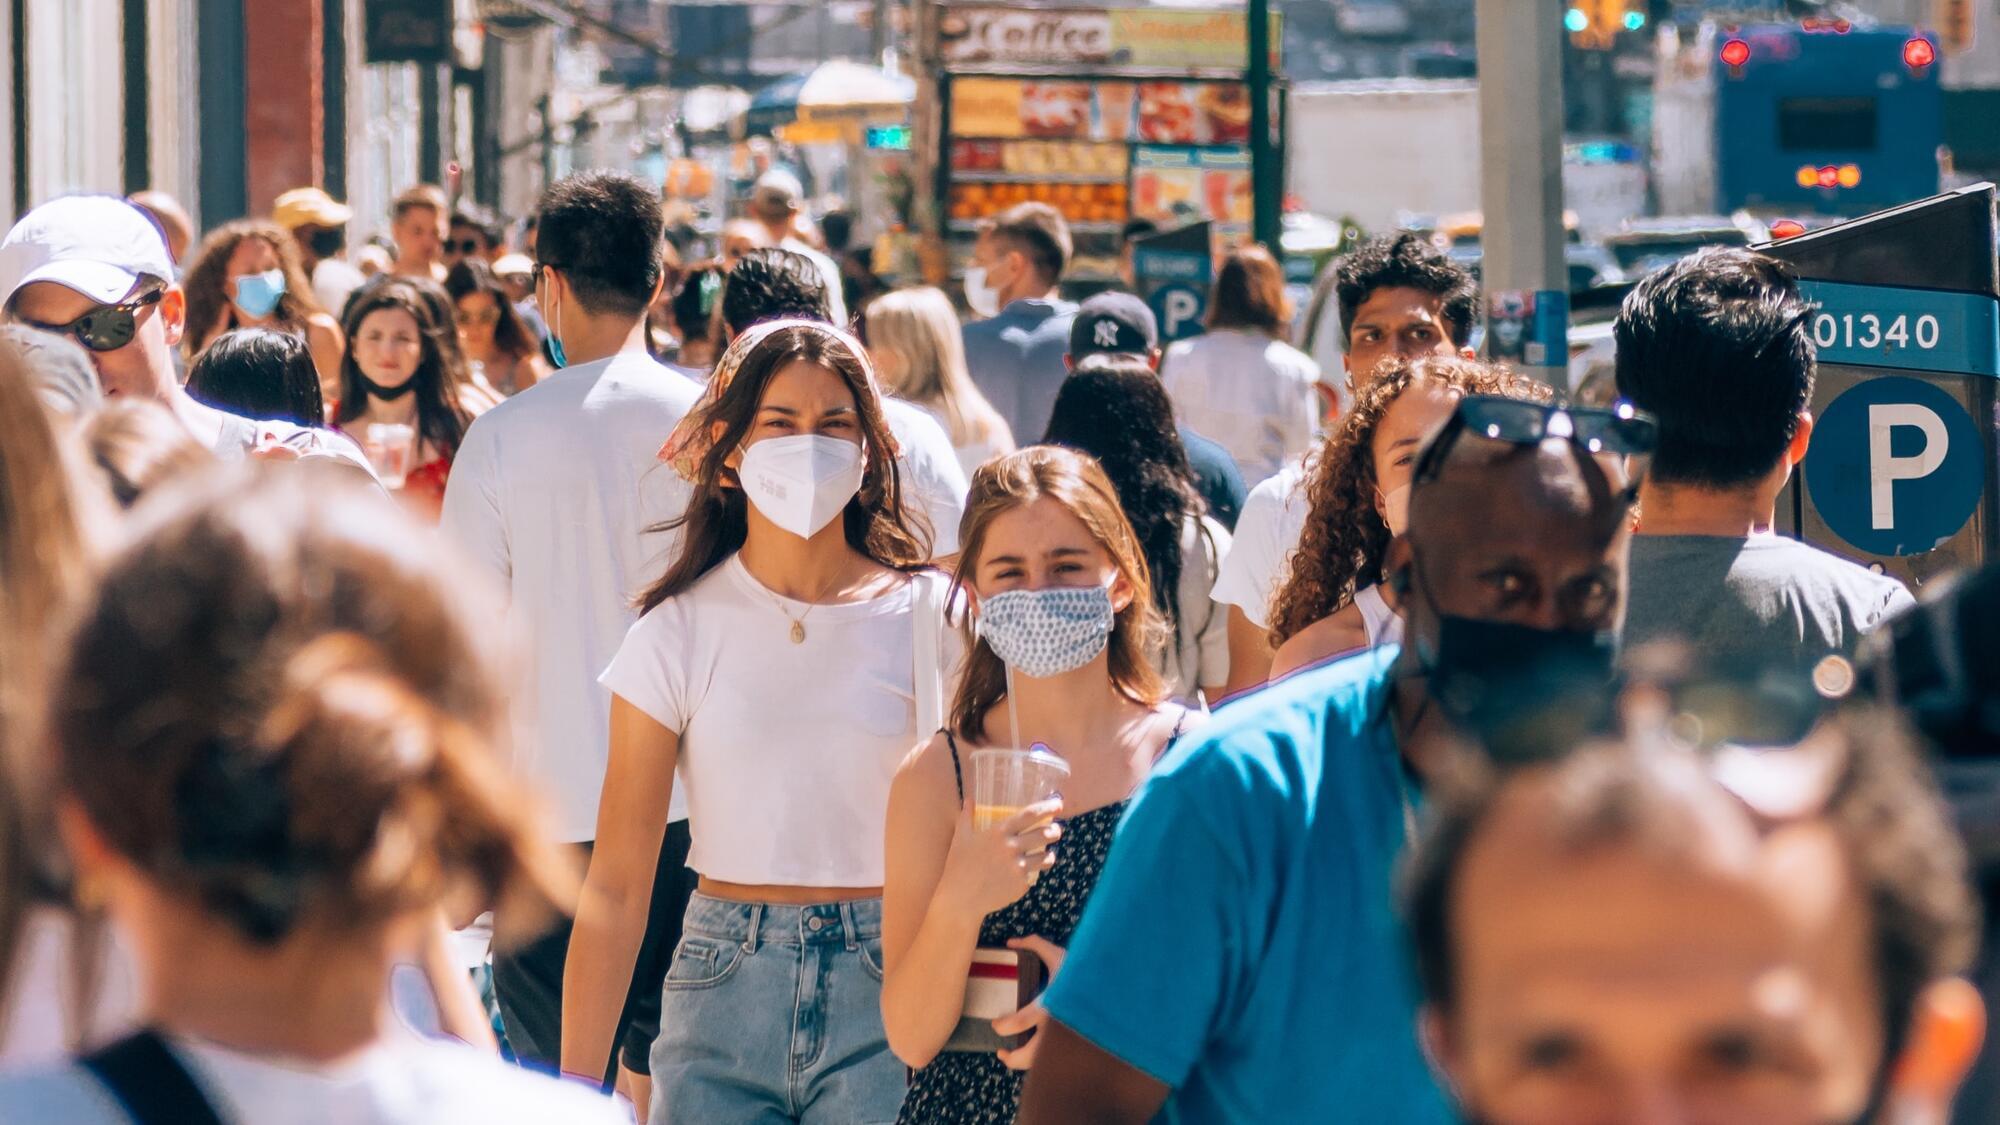 A crowd of people walking through a city street wearing medical masks